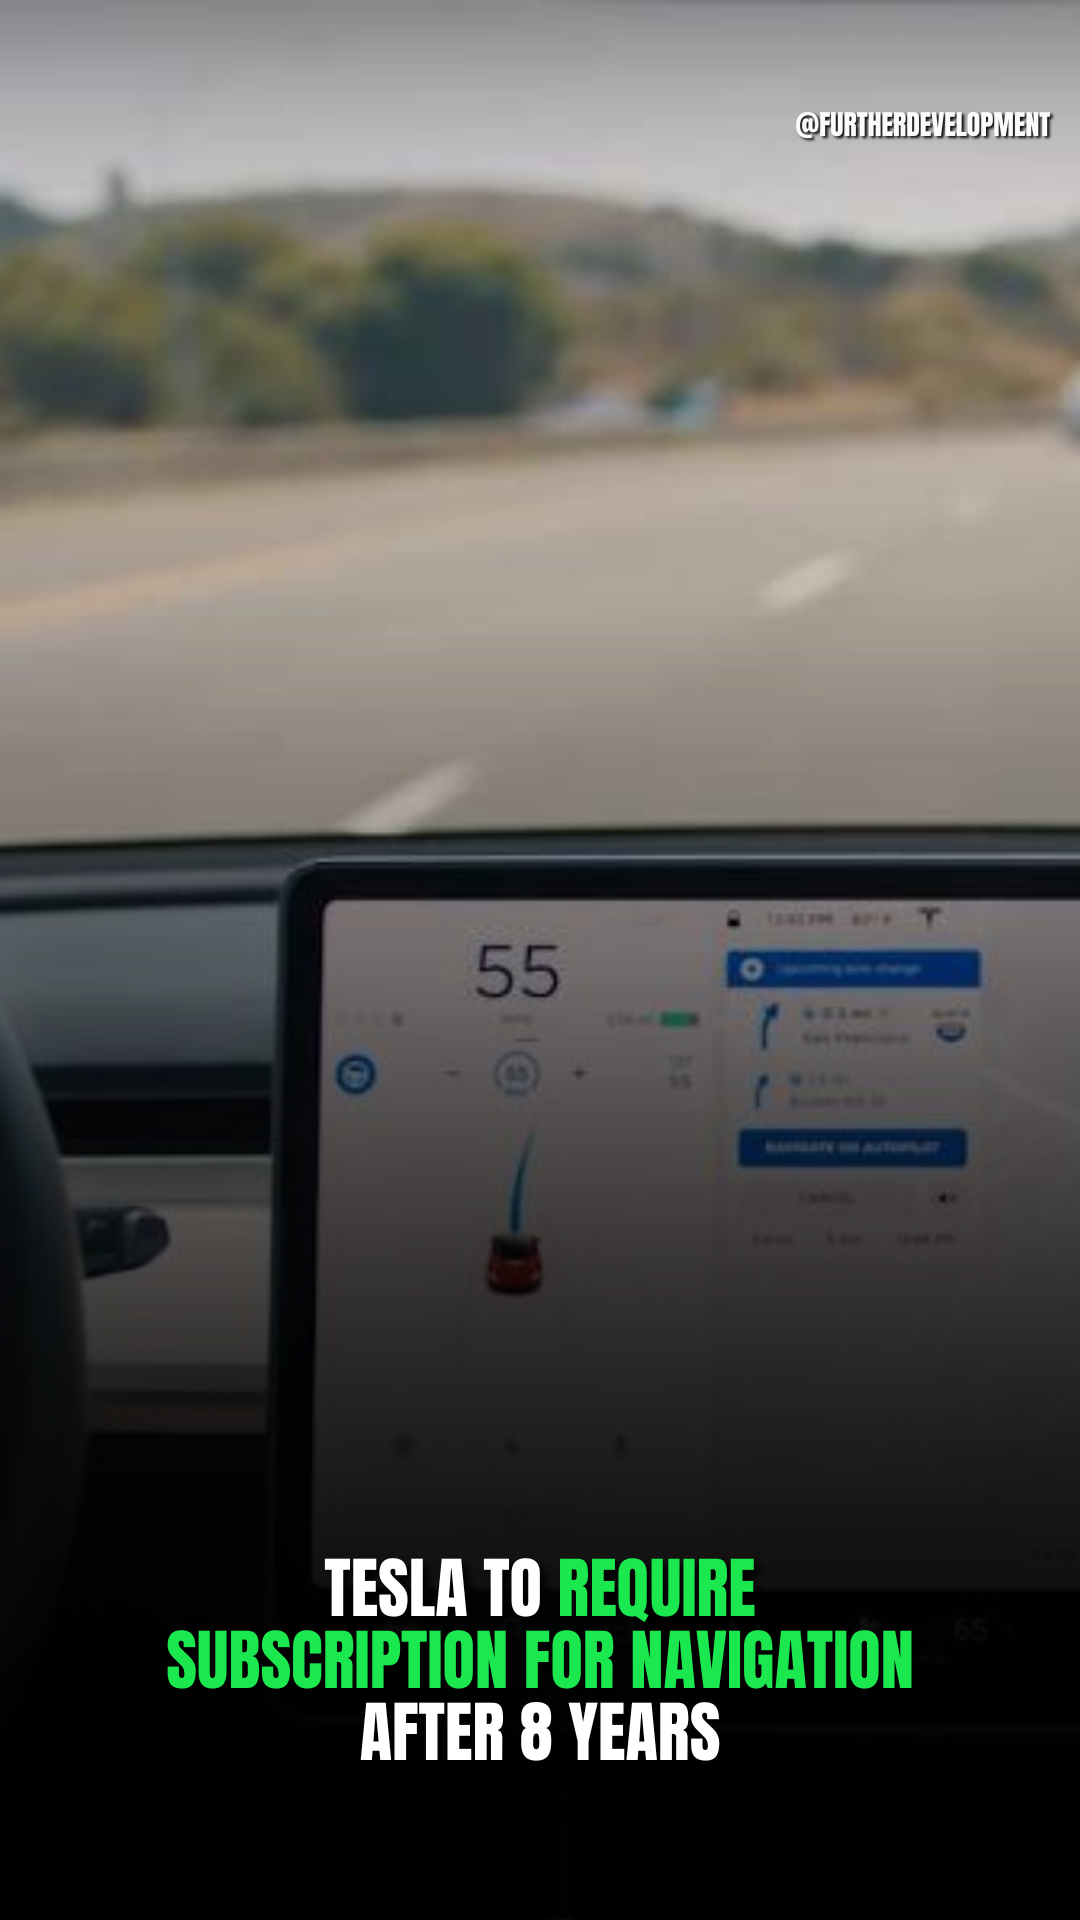 TESLA TO REQUIRE SUBSCRIPTION FOR NAVIGATION AFTER 8 yEARS